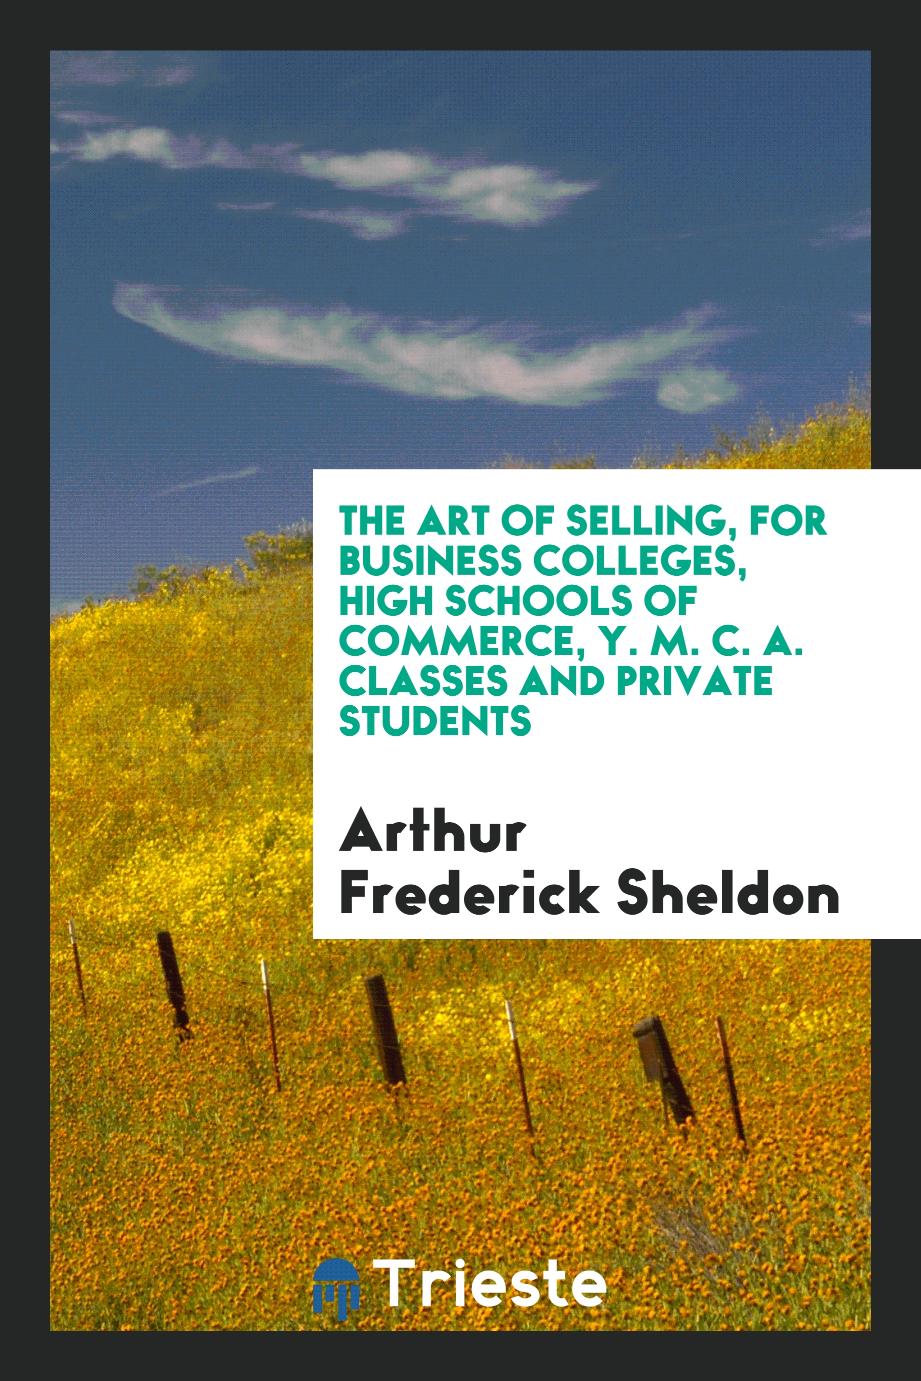 The Art of Selling, for Business Colleges, High Schools of Commerce, Y. M. C. A. Classes and Private Students